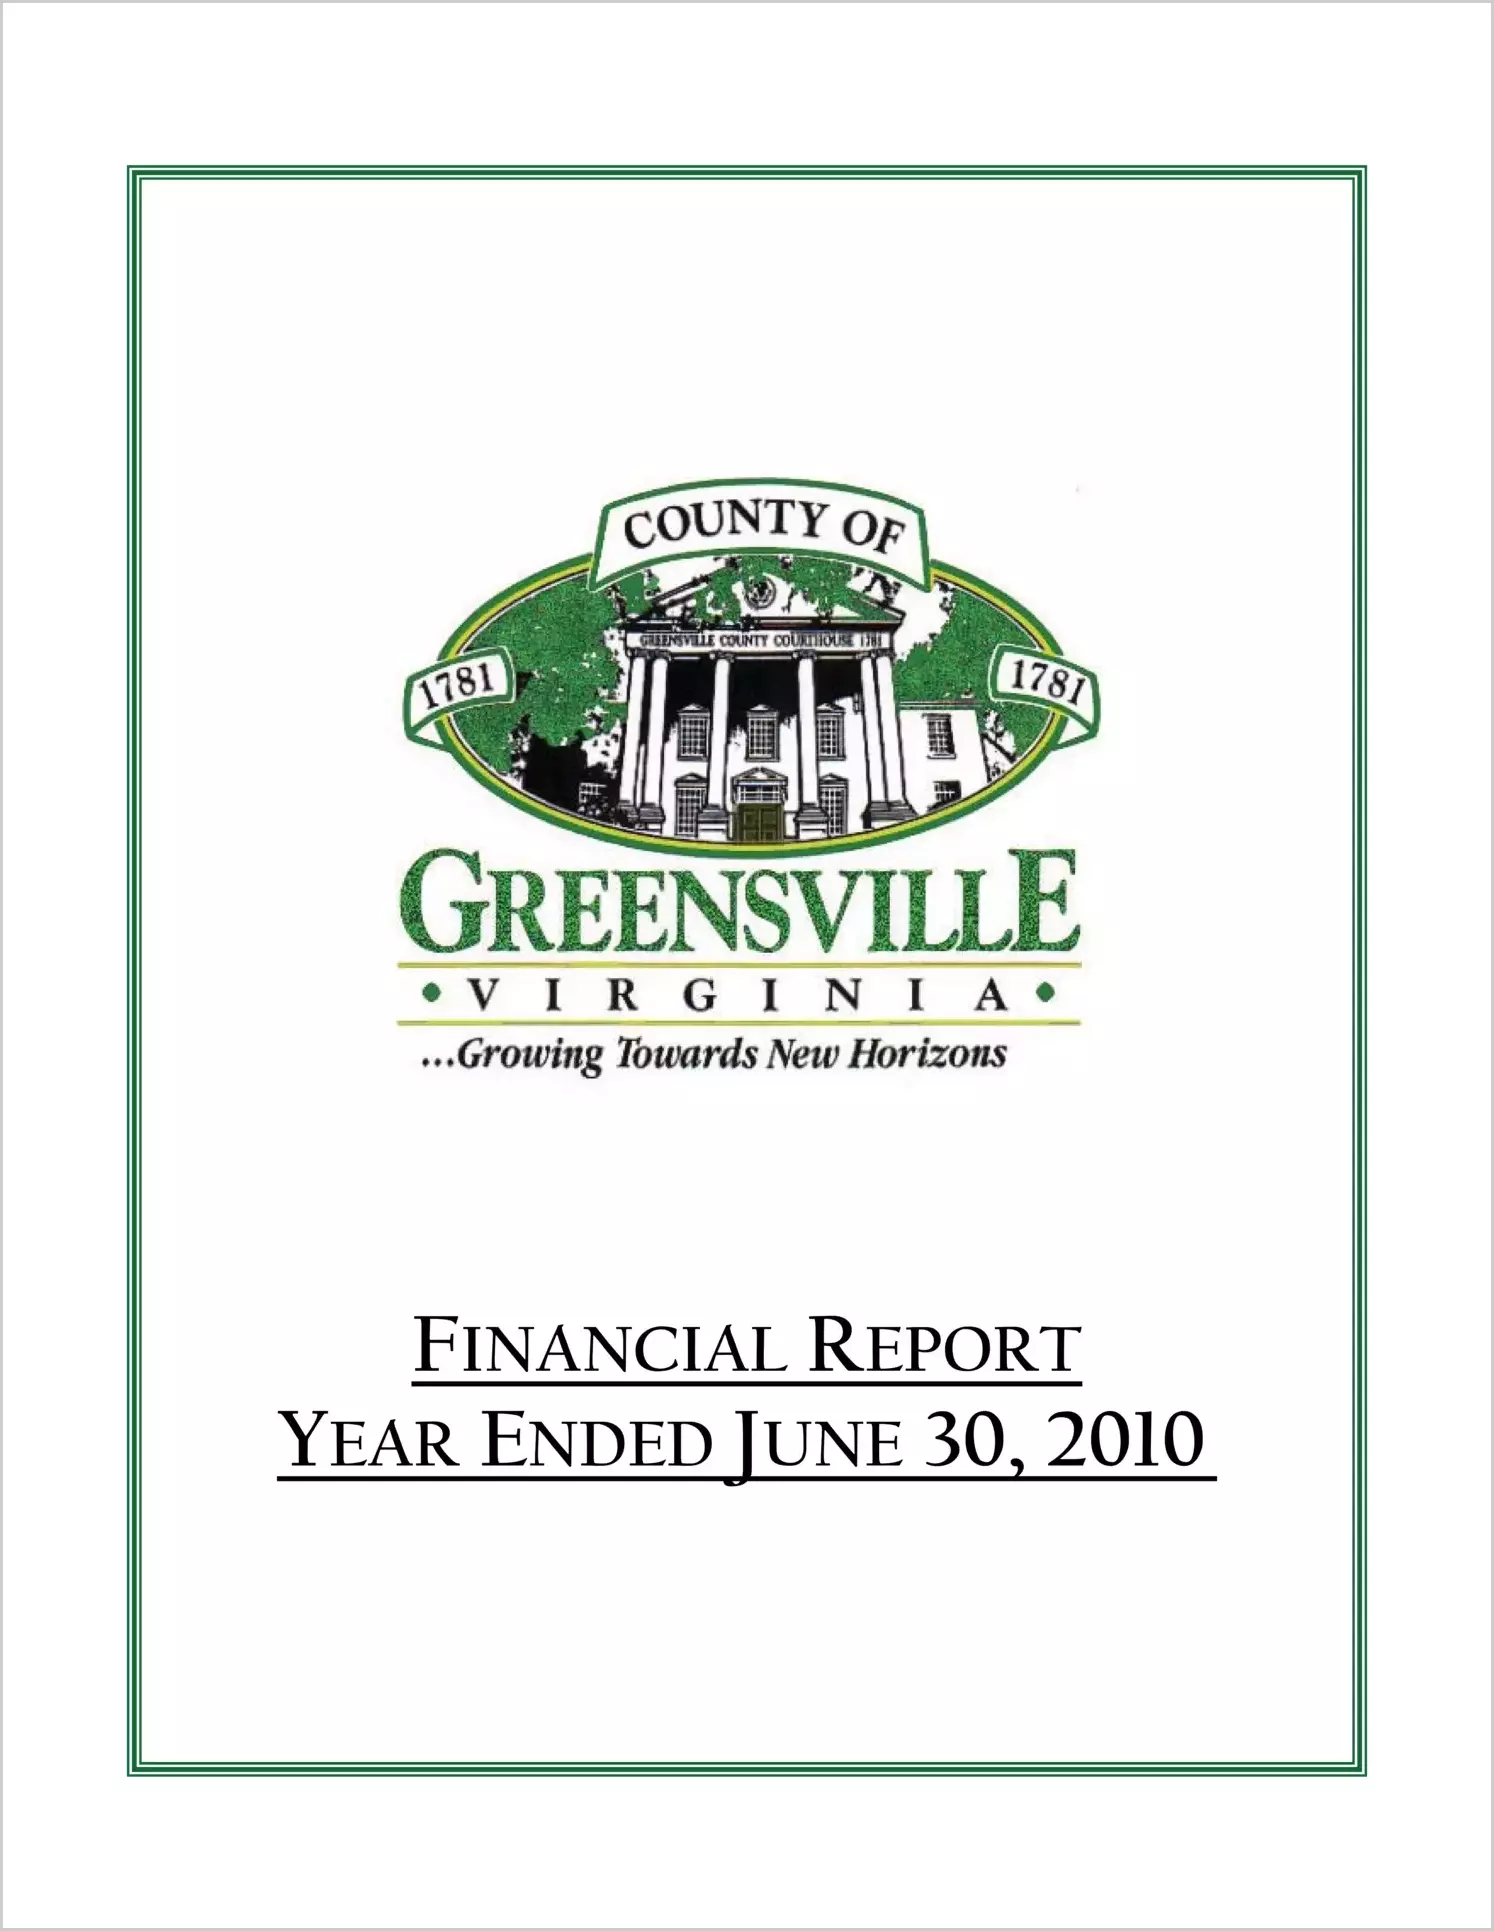 2010 Annual Financial Report for County of Greensville